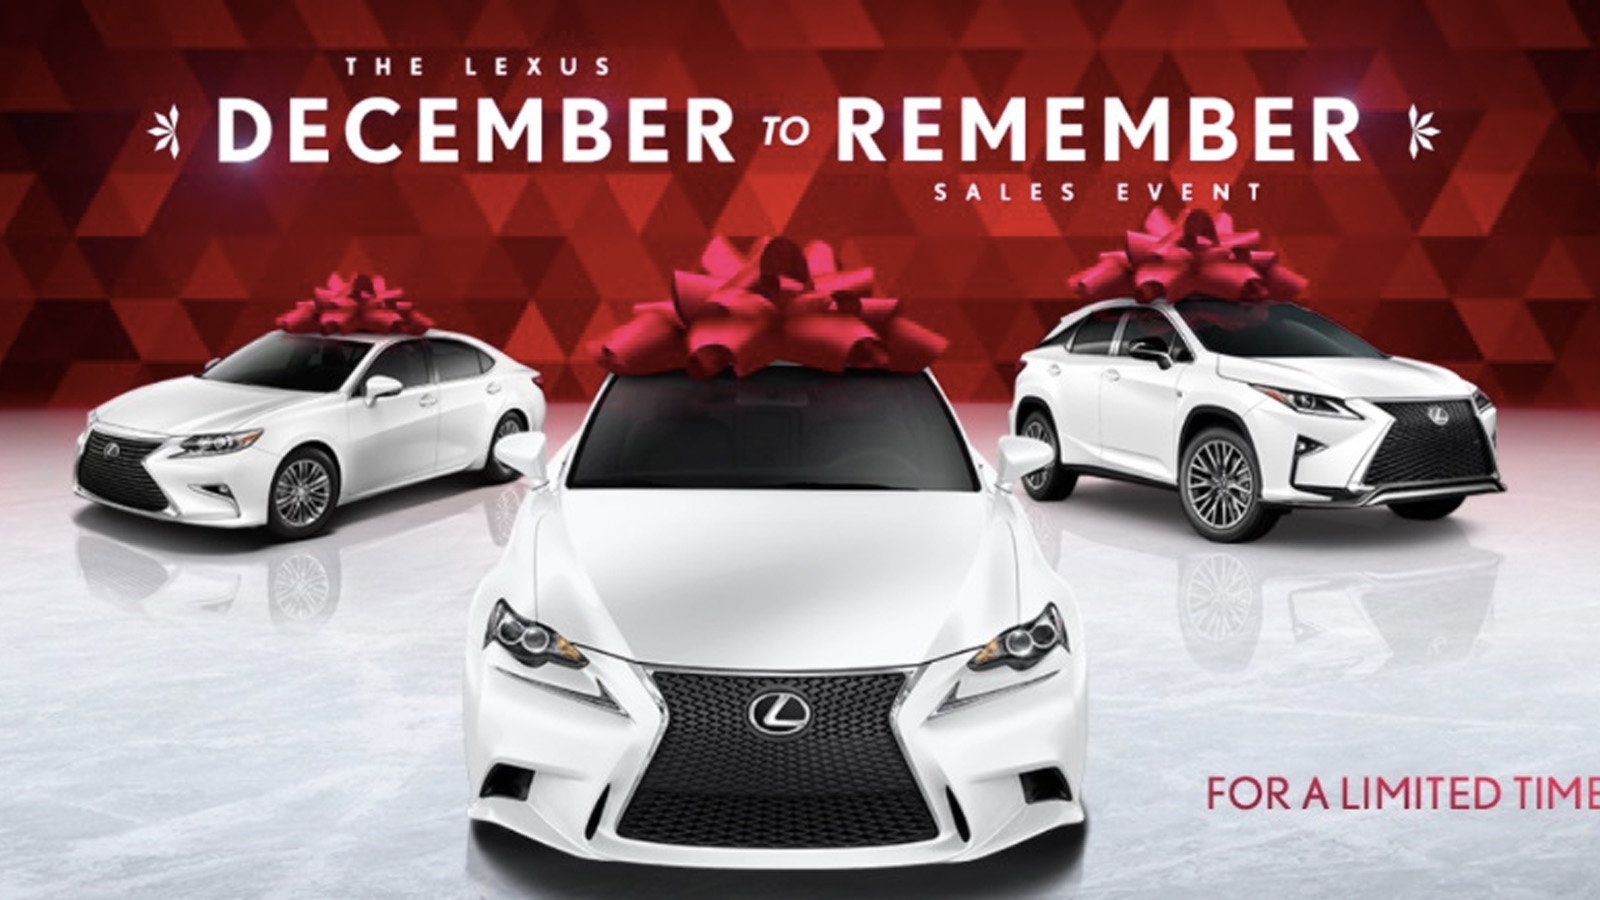 Lexus “December to Remember” Car Bow – King Size Bows